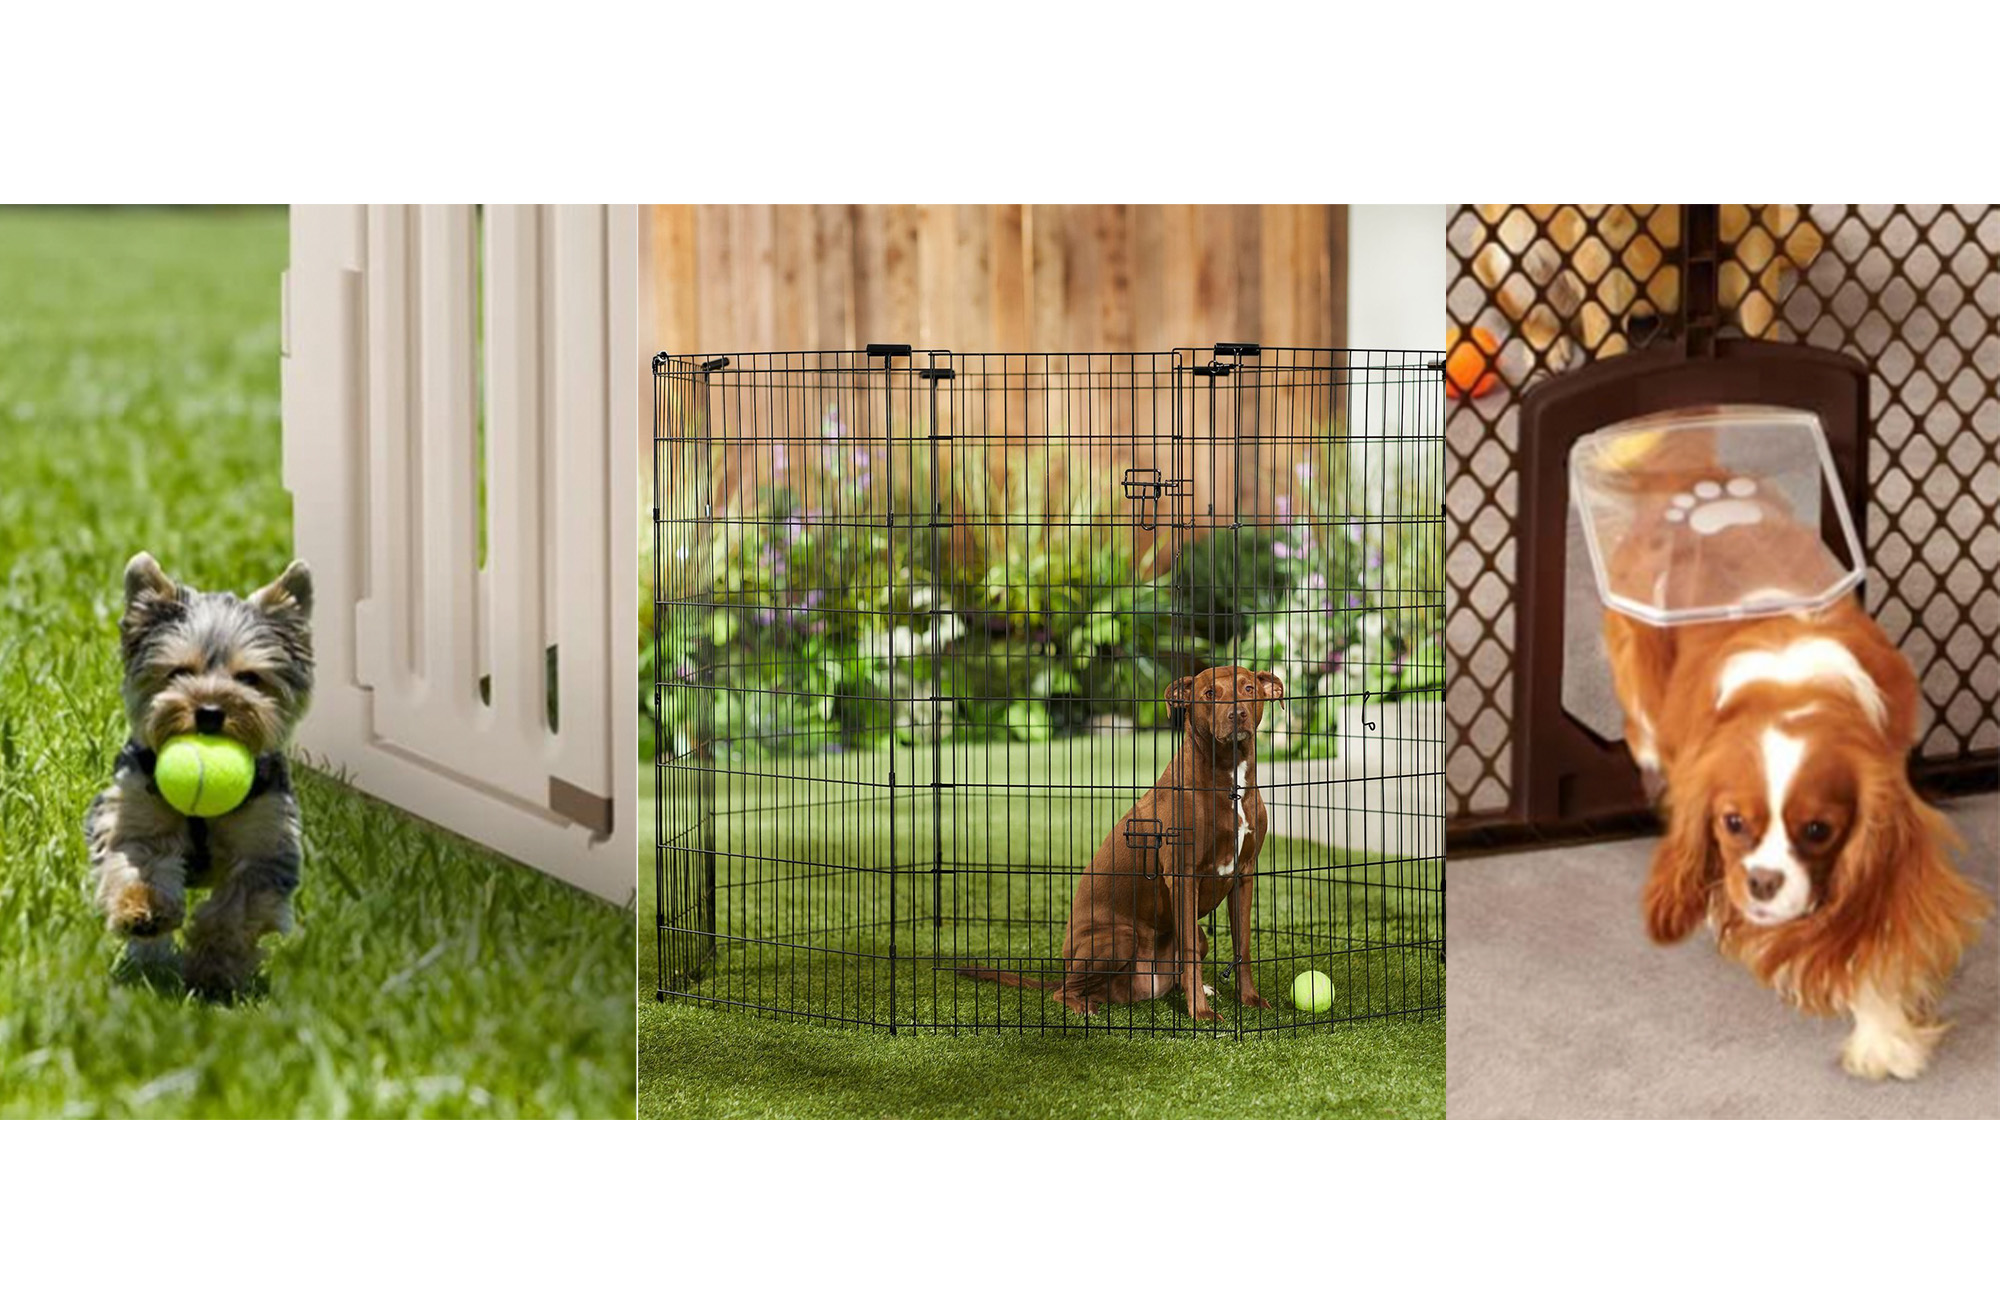 Keep your pet secure with one of the best dog pens.